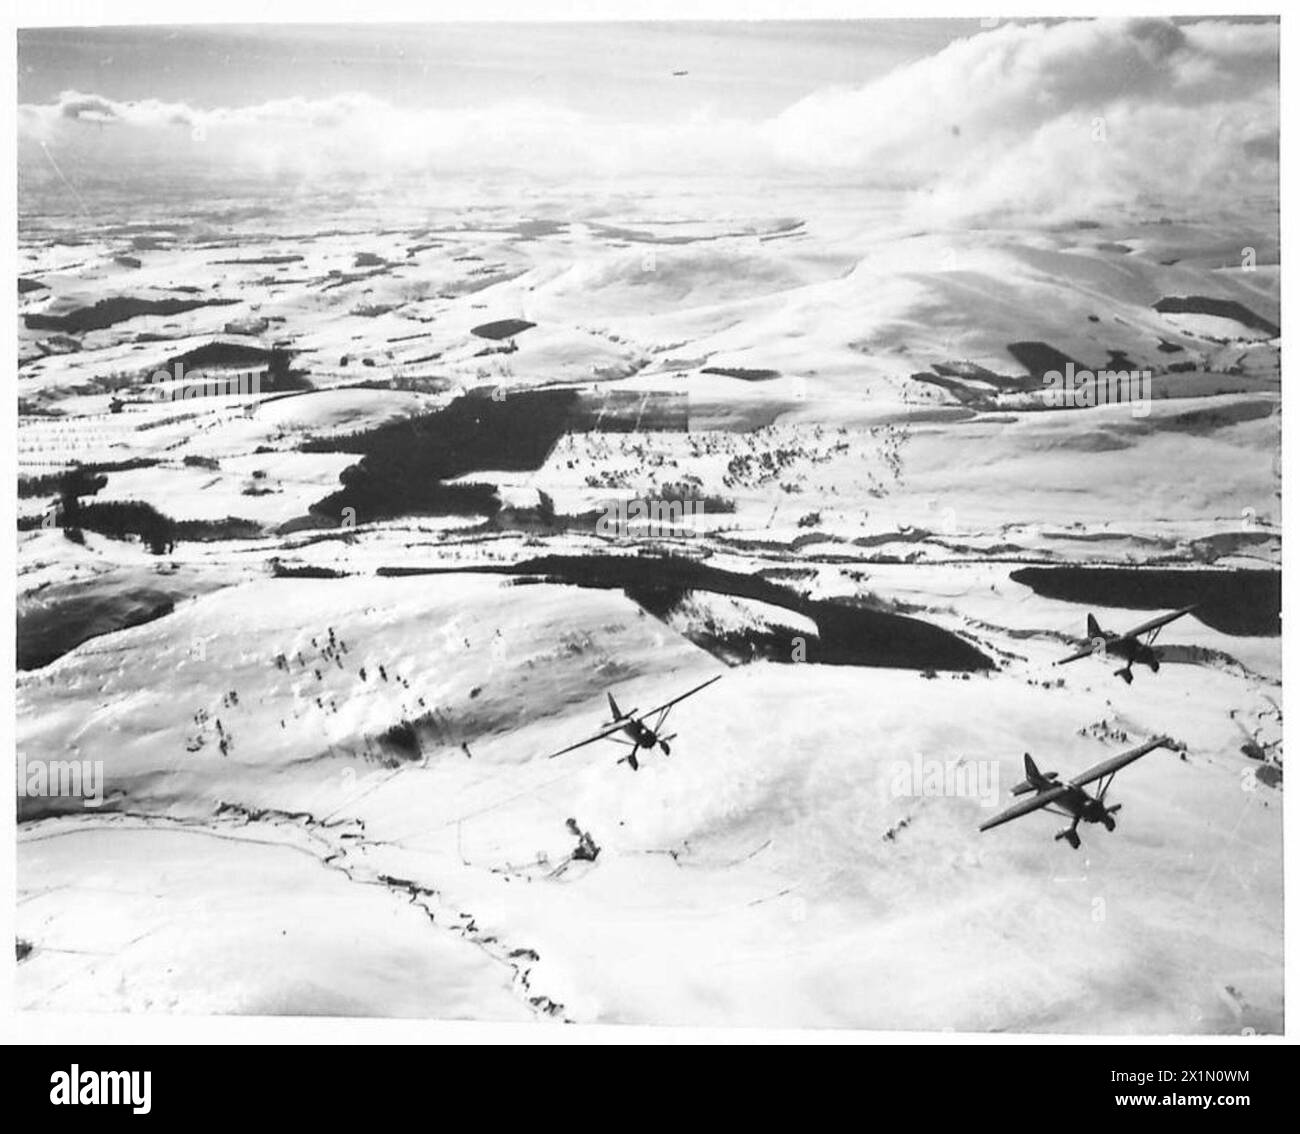 THE POLISH AIR FORCE IN BRITAIN, 1940-1947 - Three Westland Lysander Mark IIIAs of No. 309 Polish Fighter-Reconnaissance Squadron (part of the RAF Army Cooperation Command), based at Dunino, Fife, on a photo reconnaissance training sortie over snow-covered Scottish hills, Polish Air Force, Polish Air Force, 309 'Land of Czerwień' Fighter-Reconnaissance Squadron, Royal Air Force, Station, Calveley Stock Photo